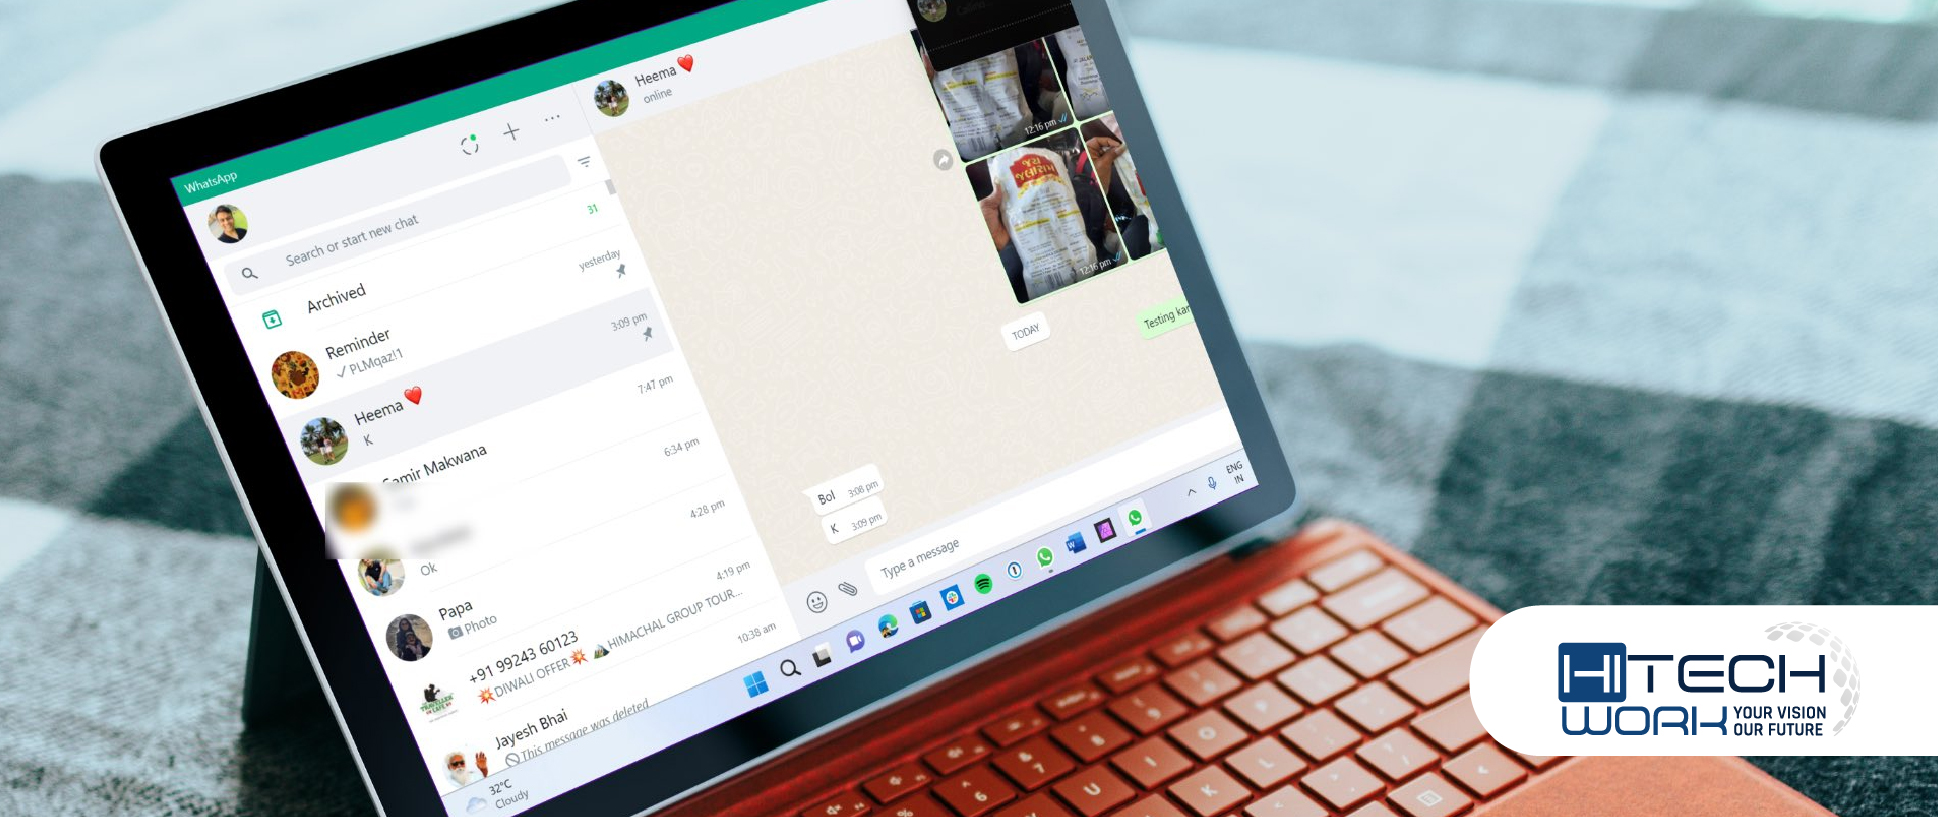 WhatsApp for Windows 11 Now Supports Voice & Video call